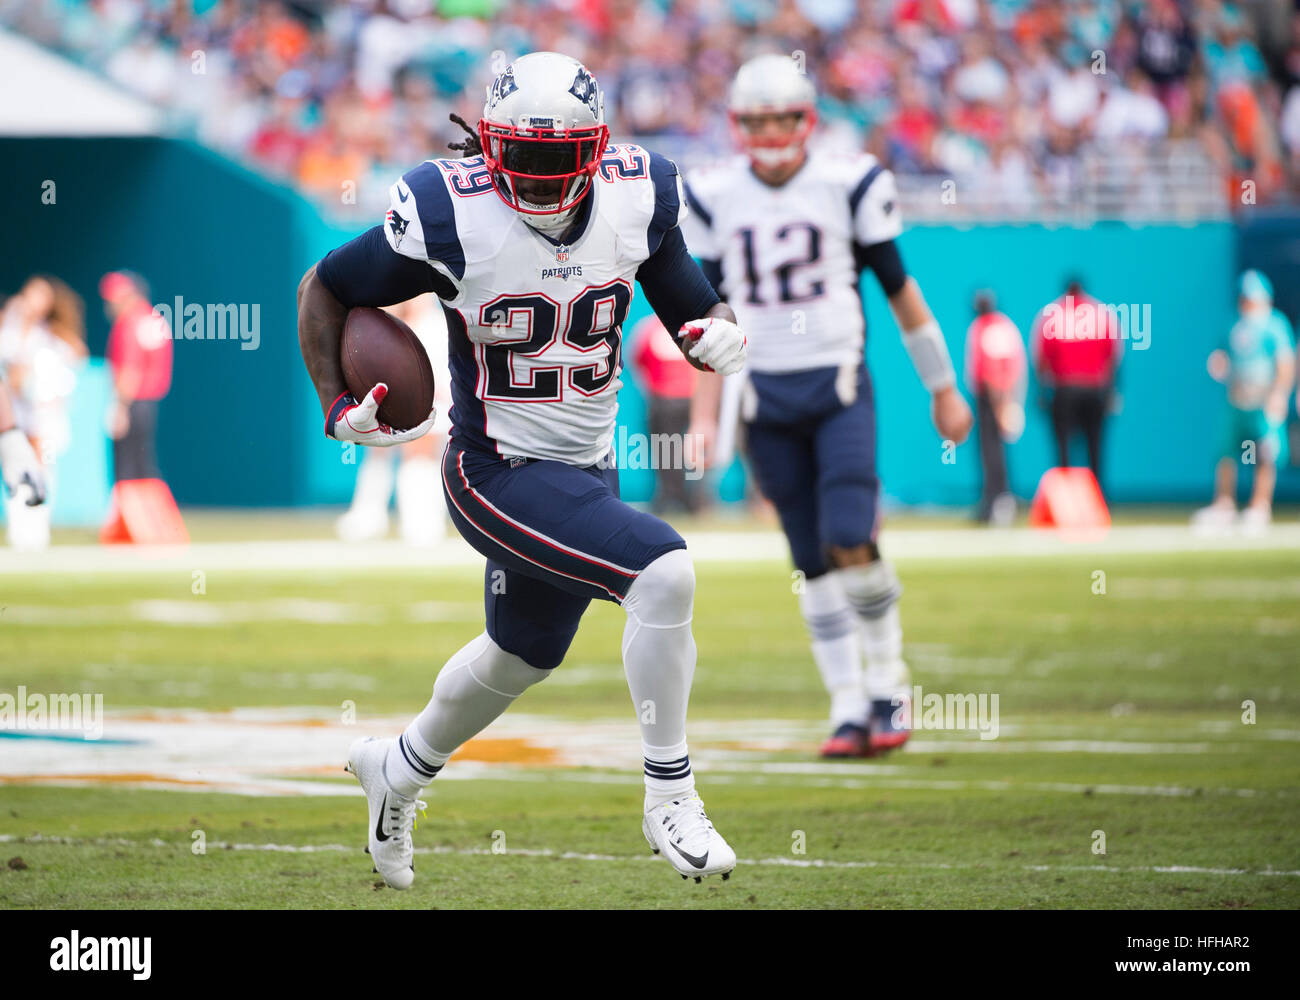 Miami Gardens, Florida, USA. 01st Jan, 2017. New England Patriots Running Back LeGarrette Blount (29) runs with ball during the NFL football game between the New England Patriots and the Miami Dolphins on January 1st 2017, at the Hard Rock Stadium in Miami Gardens, FL. © Action Plus Sports/Alamy Live News Stock Photo